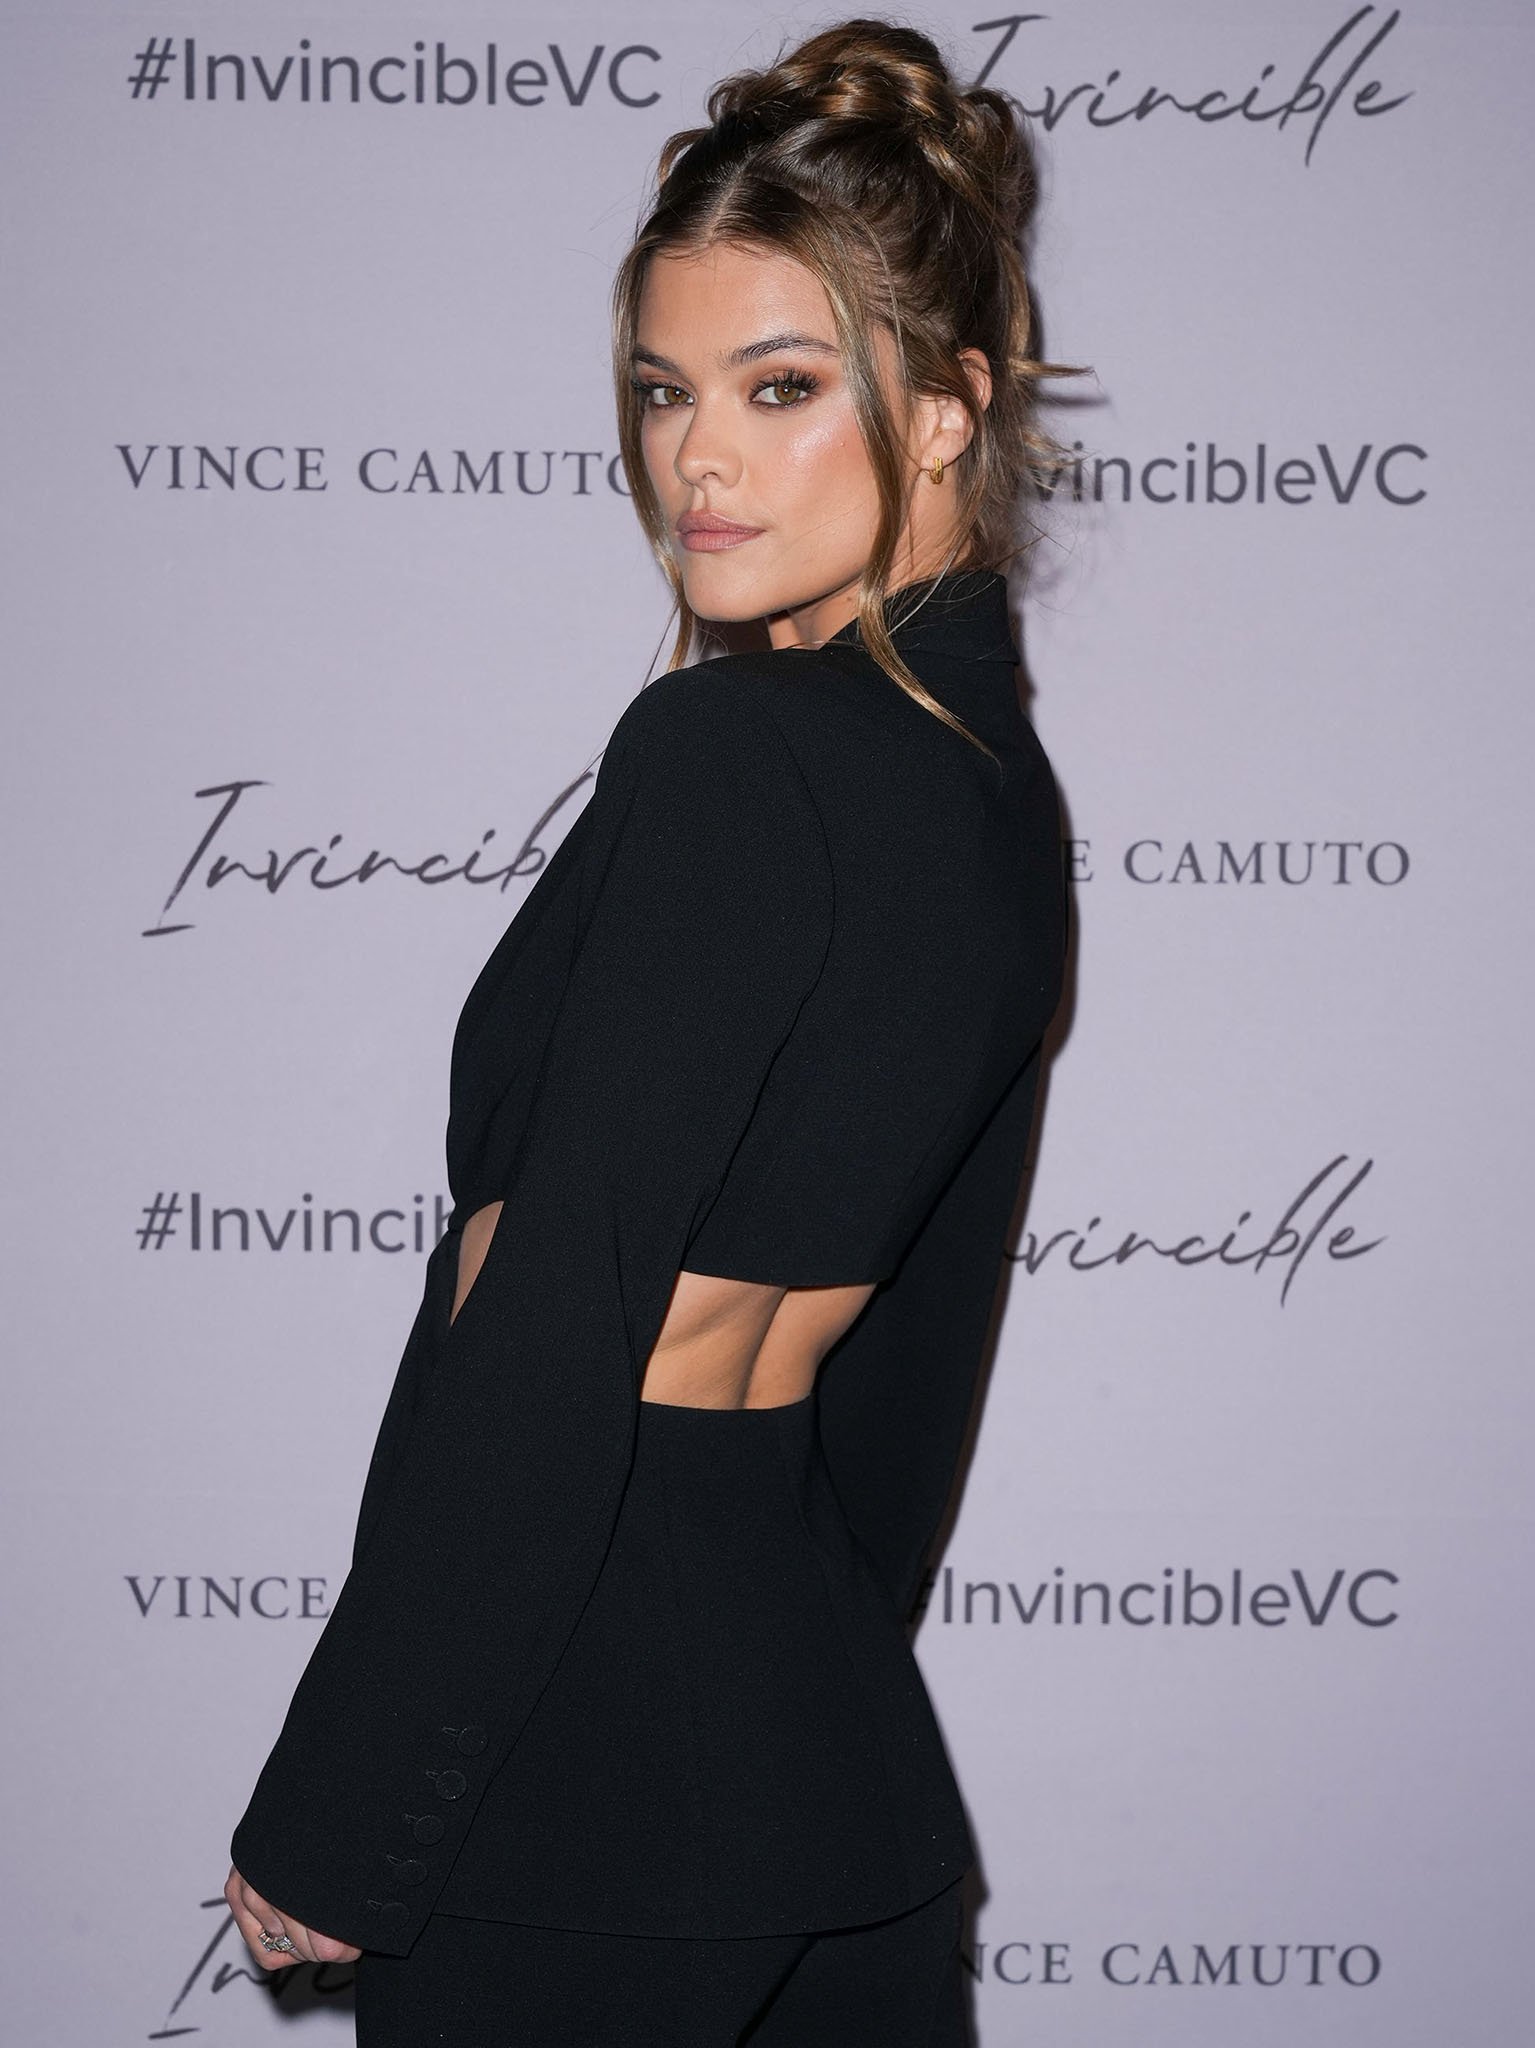 Nina Agdal styles her tresses in a braided updo and wears smokey eyeshadow and matte nude pink lipstick